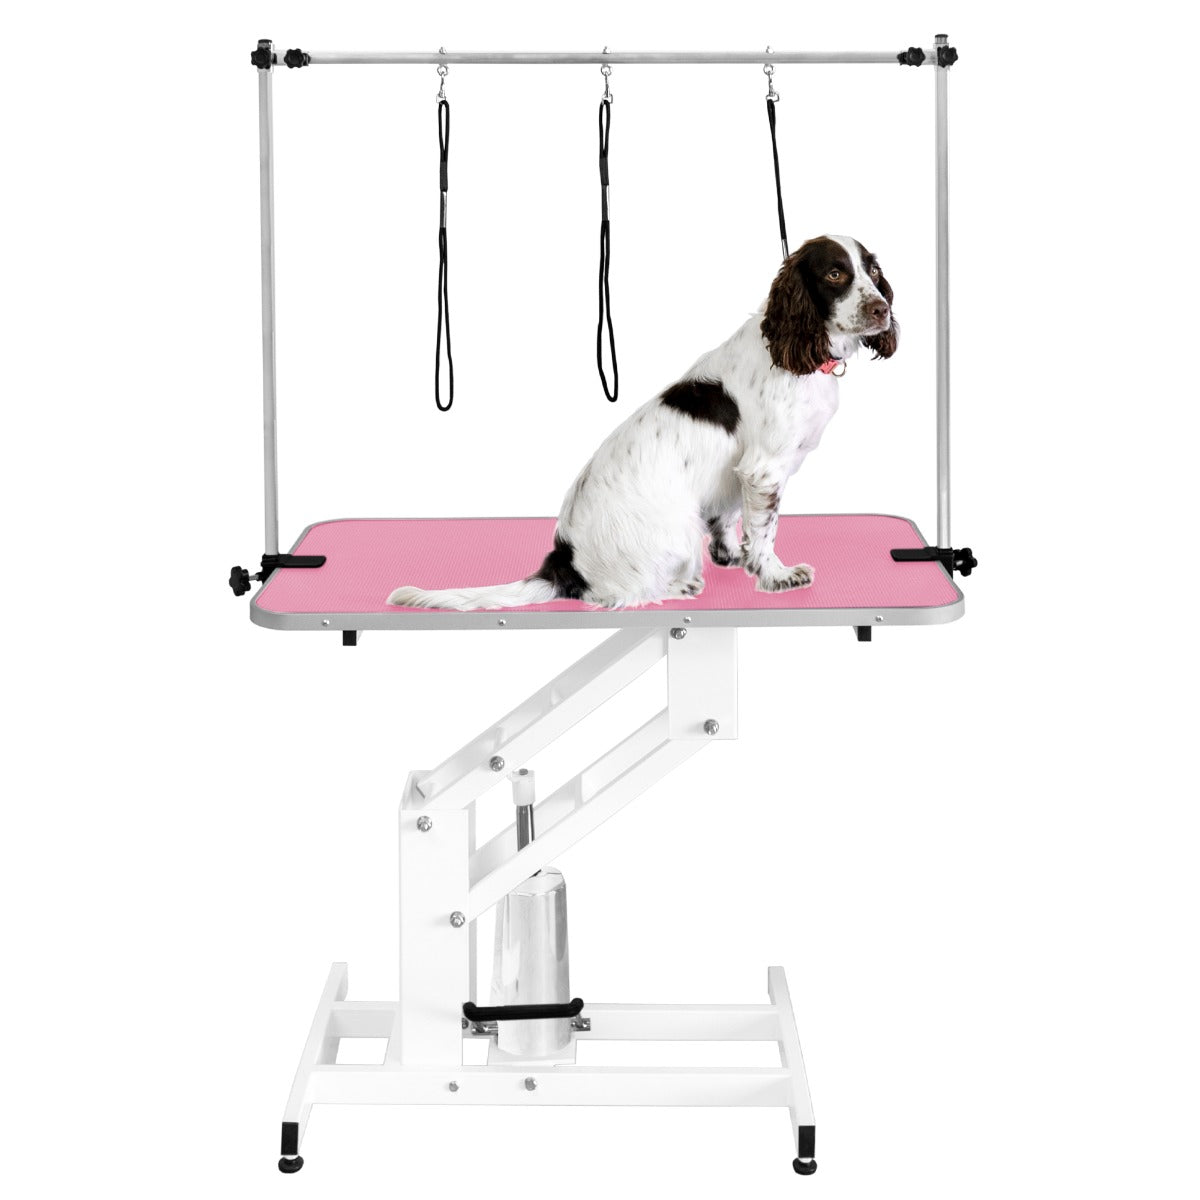 White Hydraulic Grooming Table - Pink Table Top - Used - Very Good